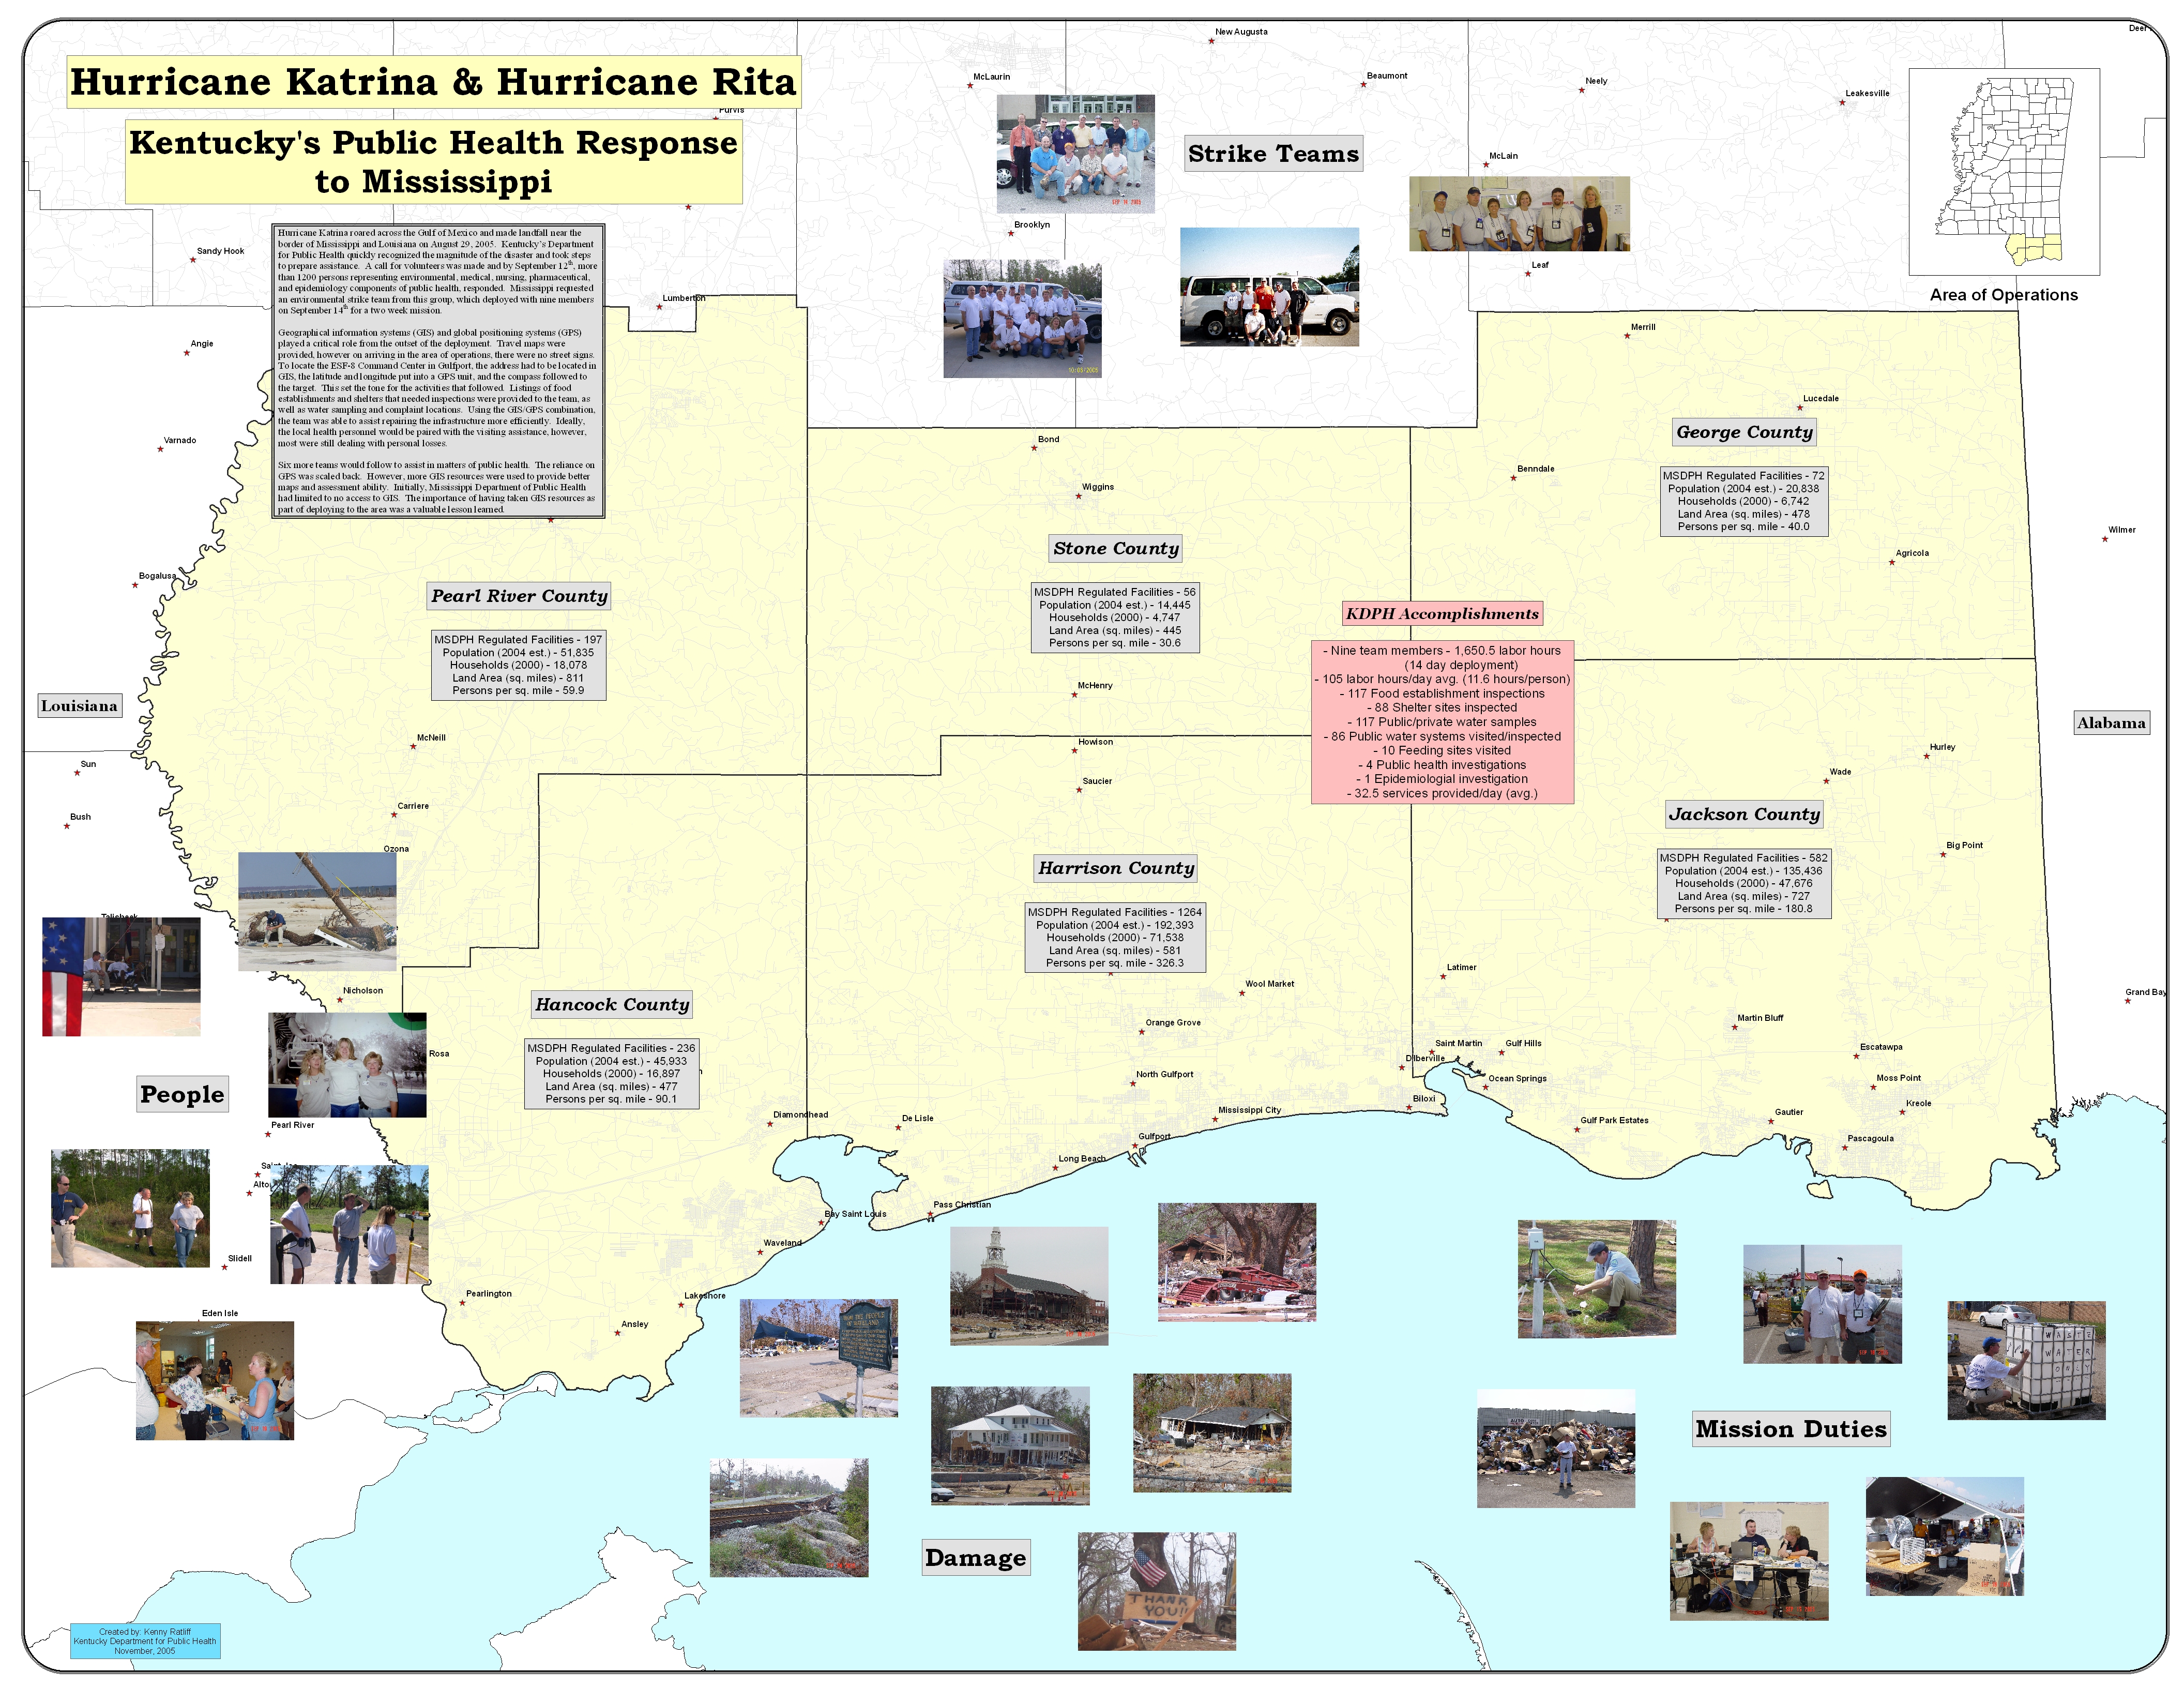 Kentucky’s Public Health Response for Hurricane’s Katrina and Rita in Mississippi Map Image